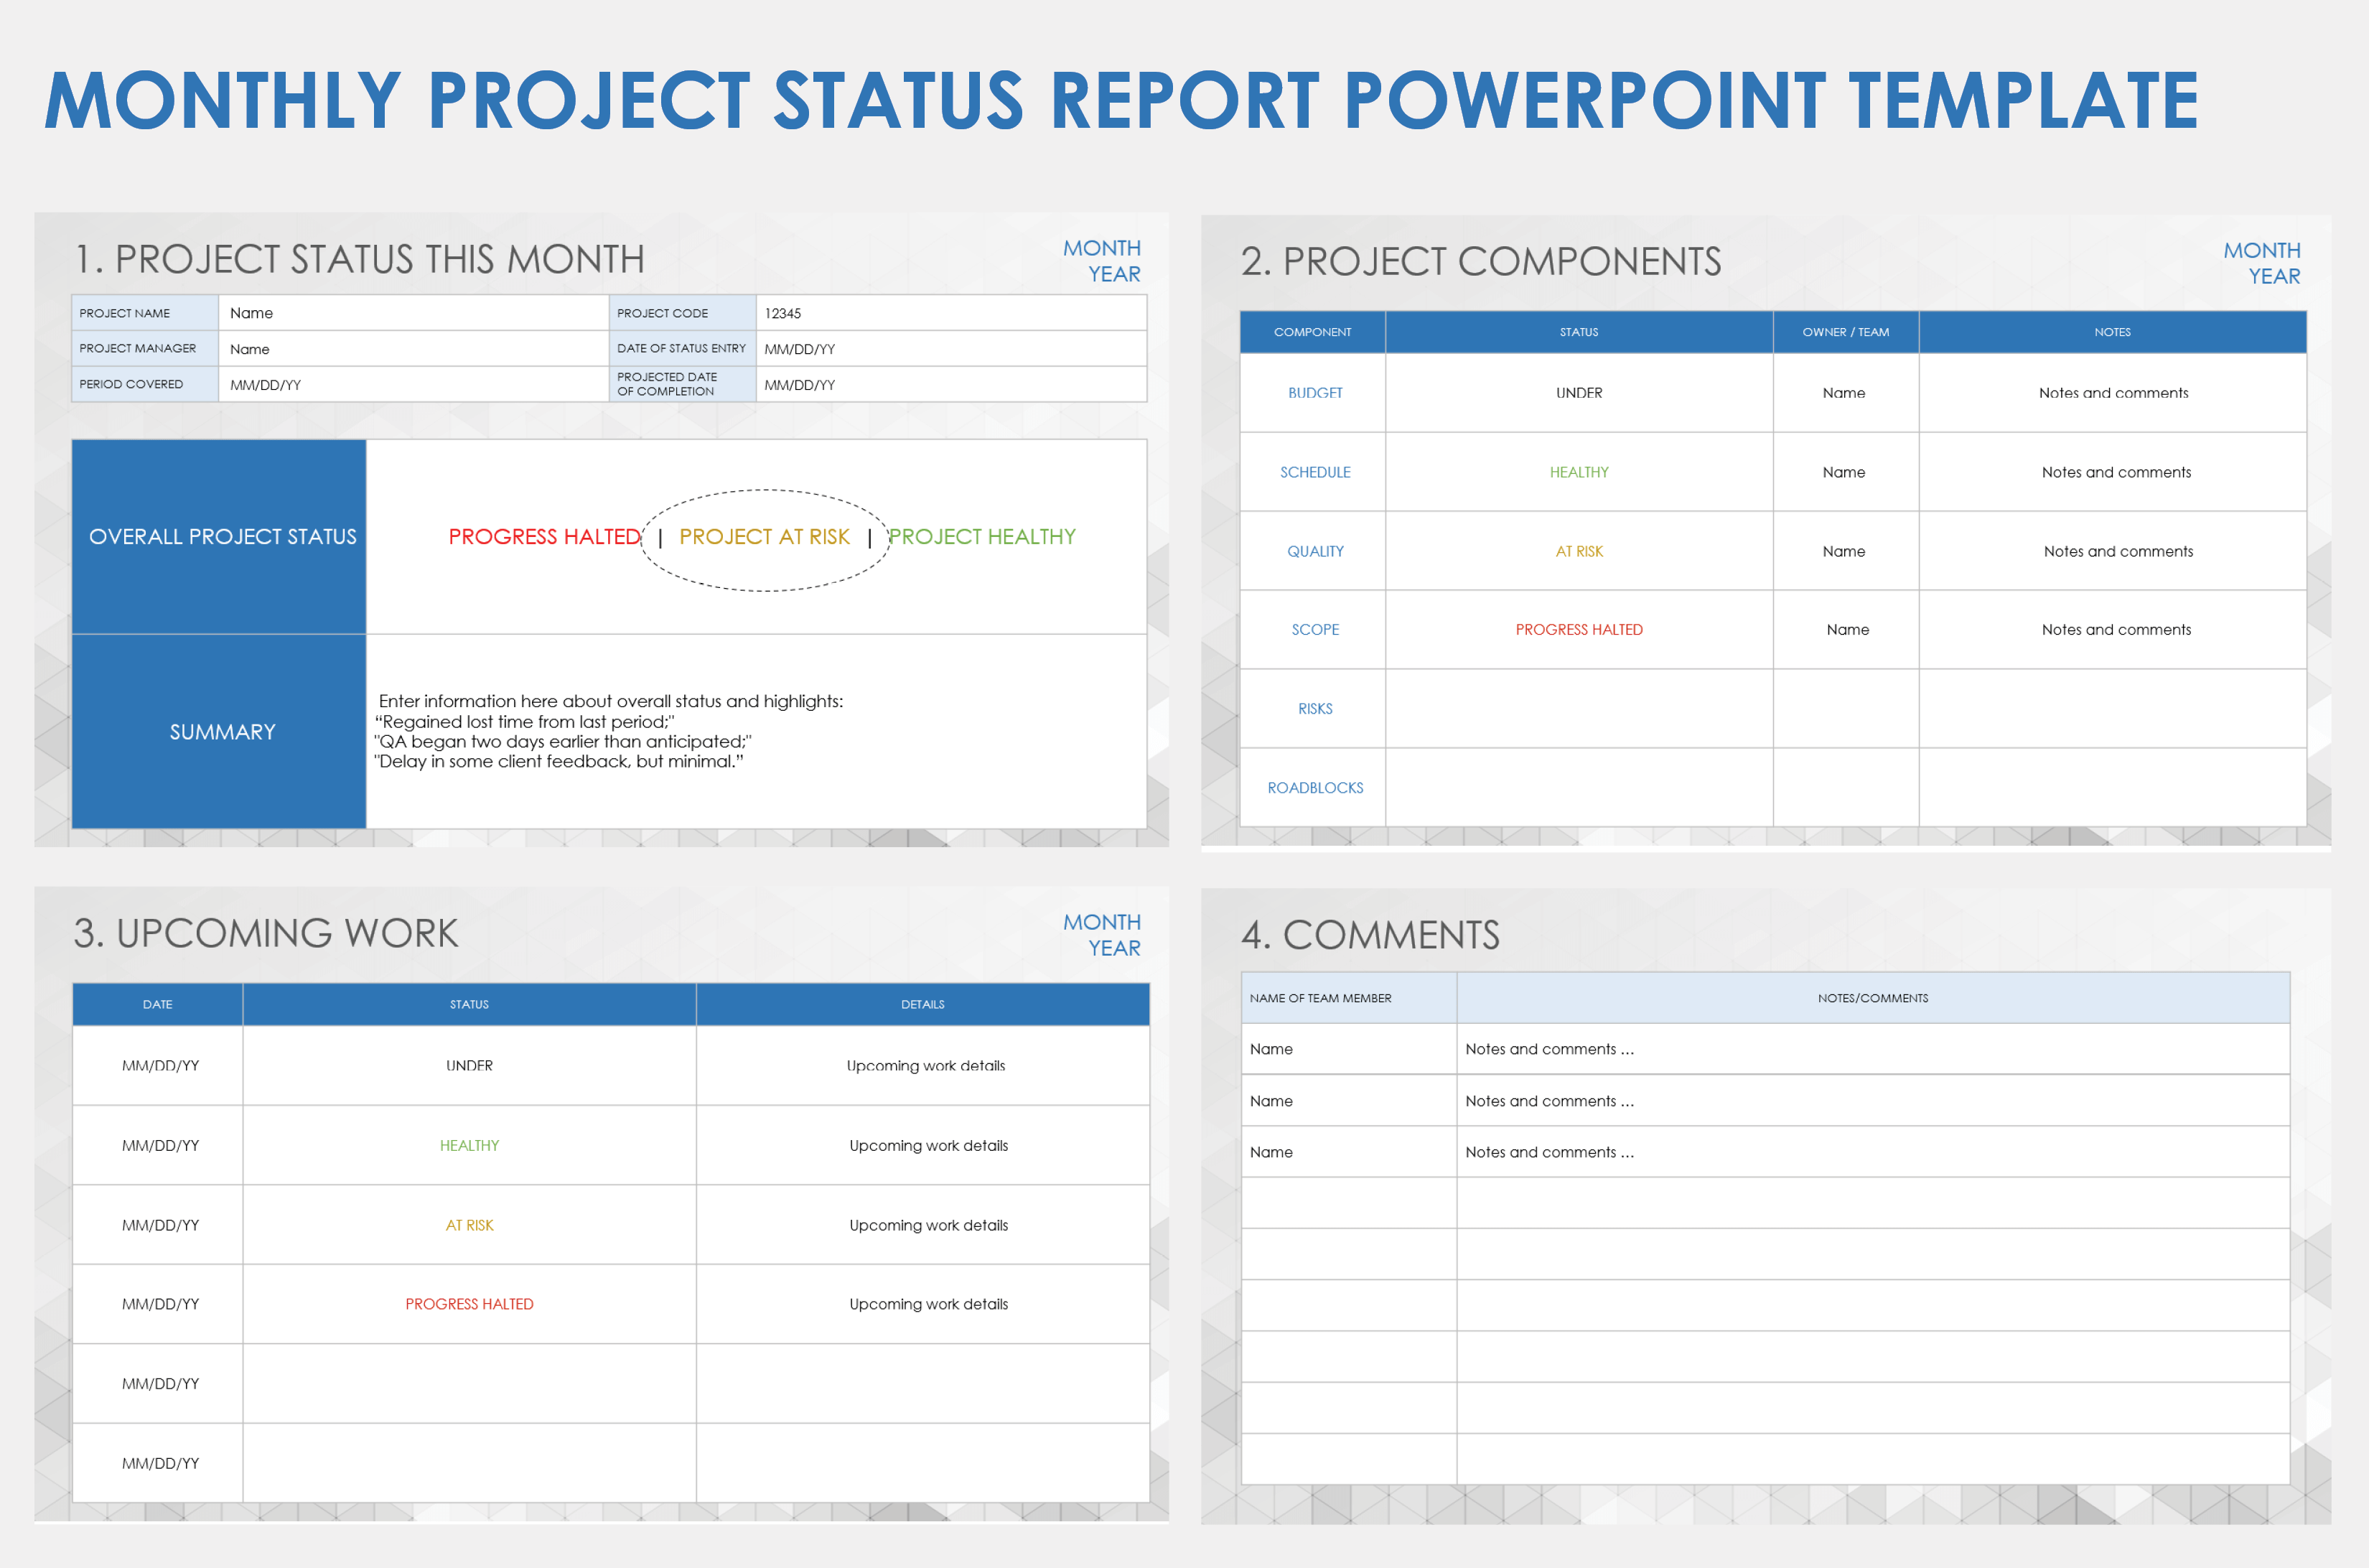 Monthly Project Status Report PowerPoint Template